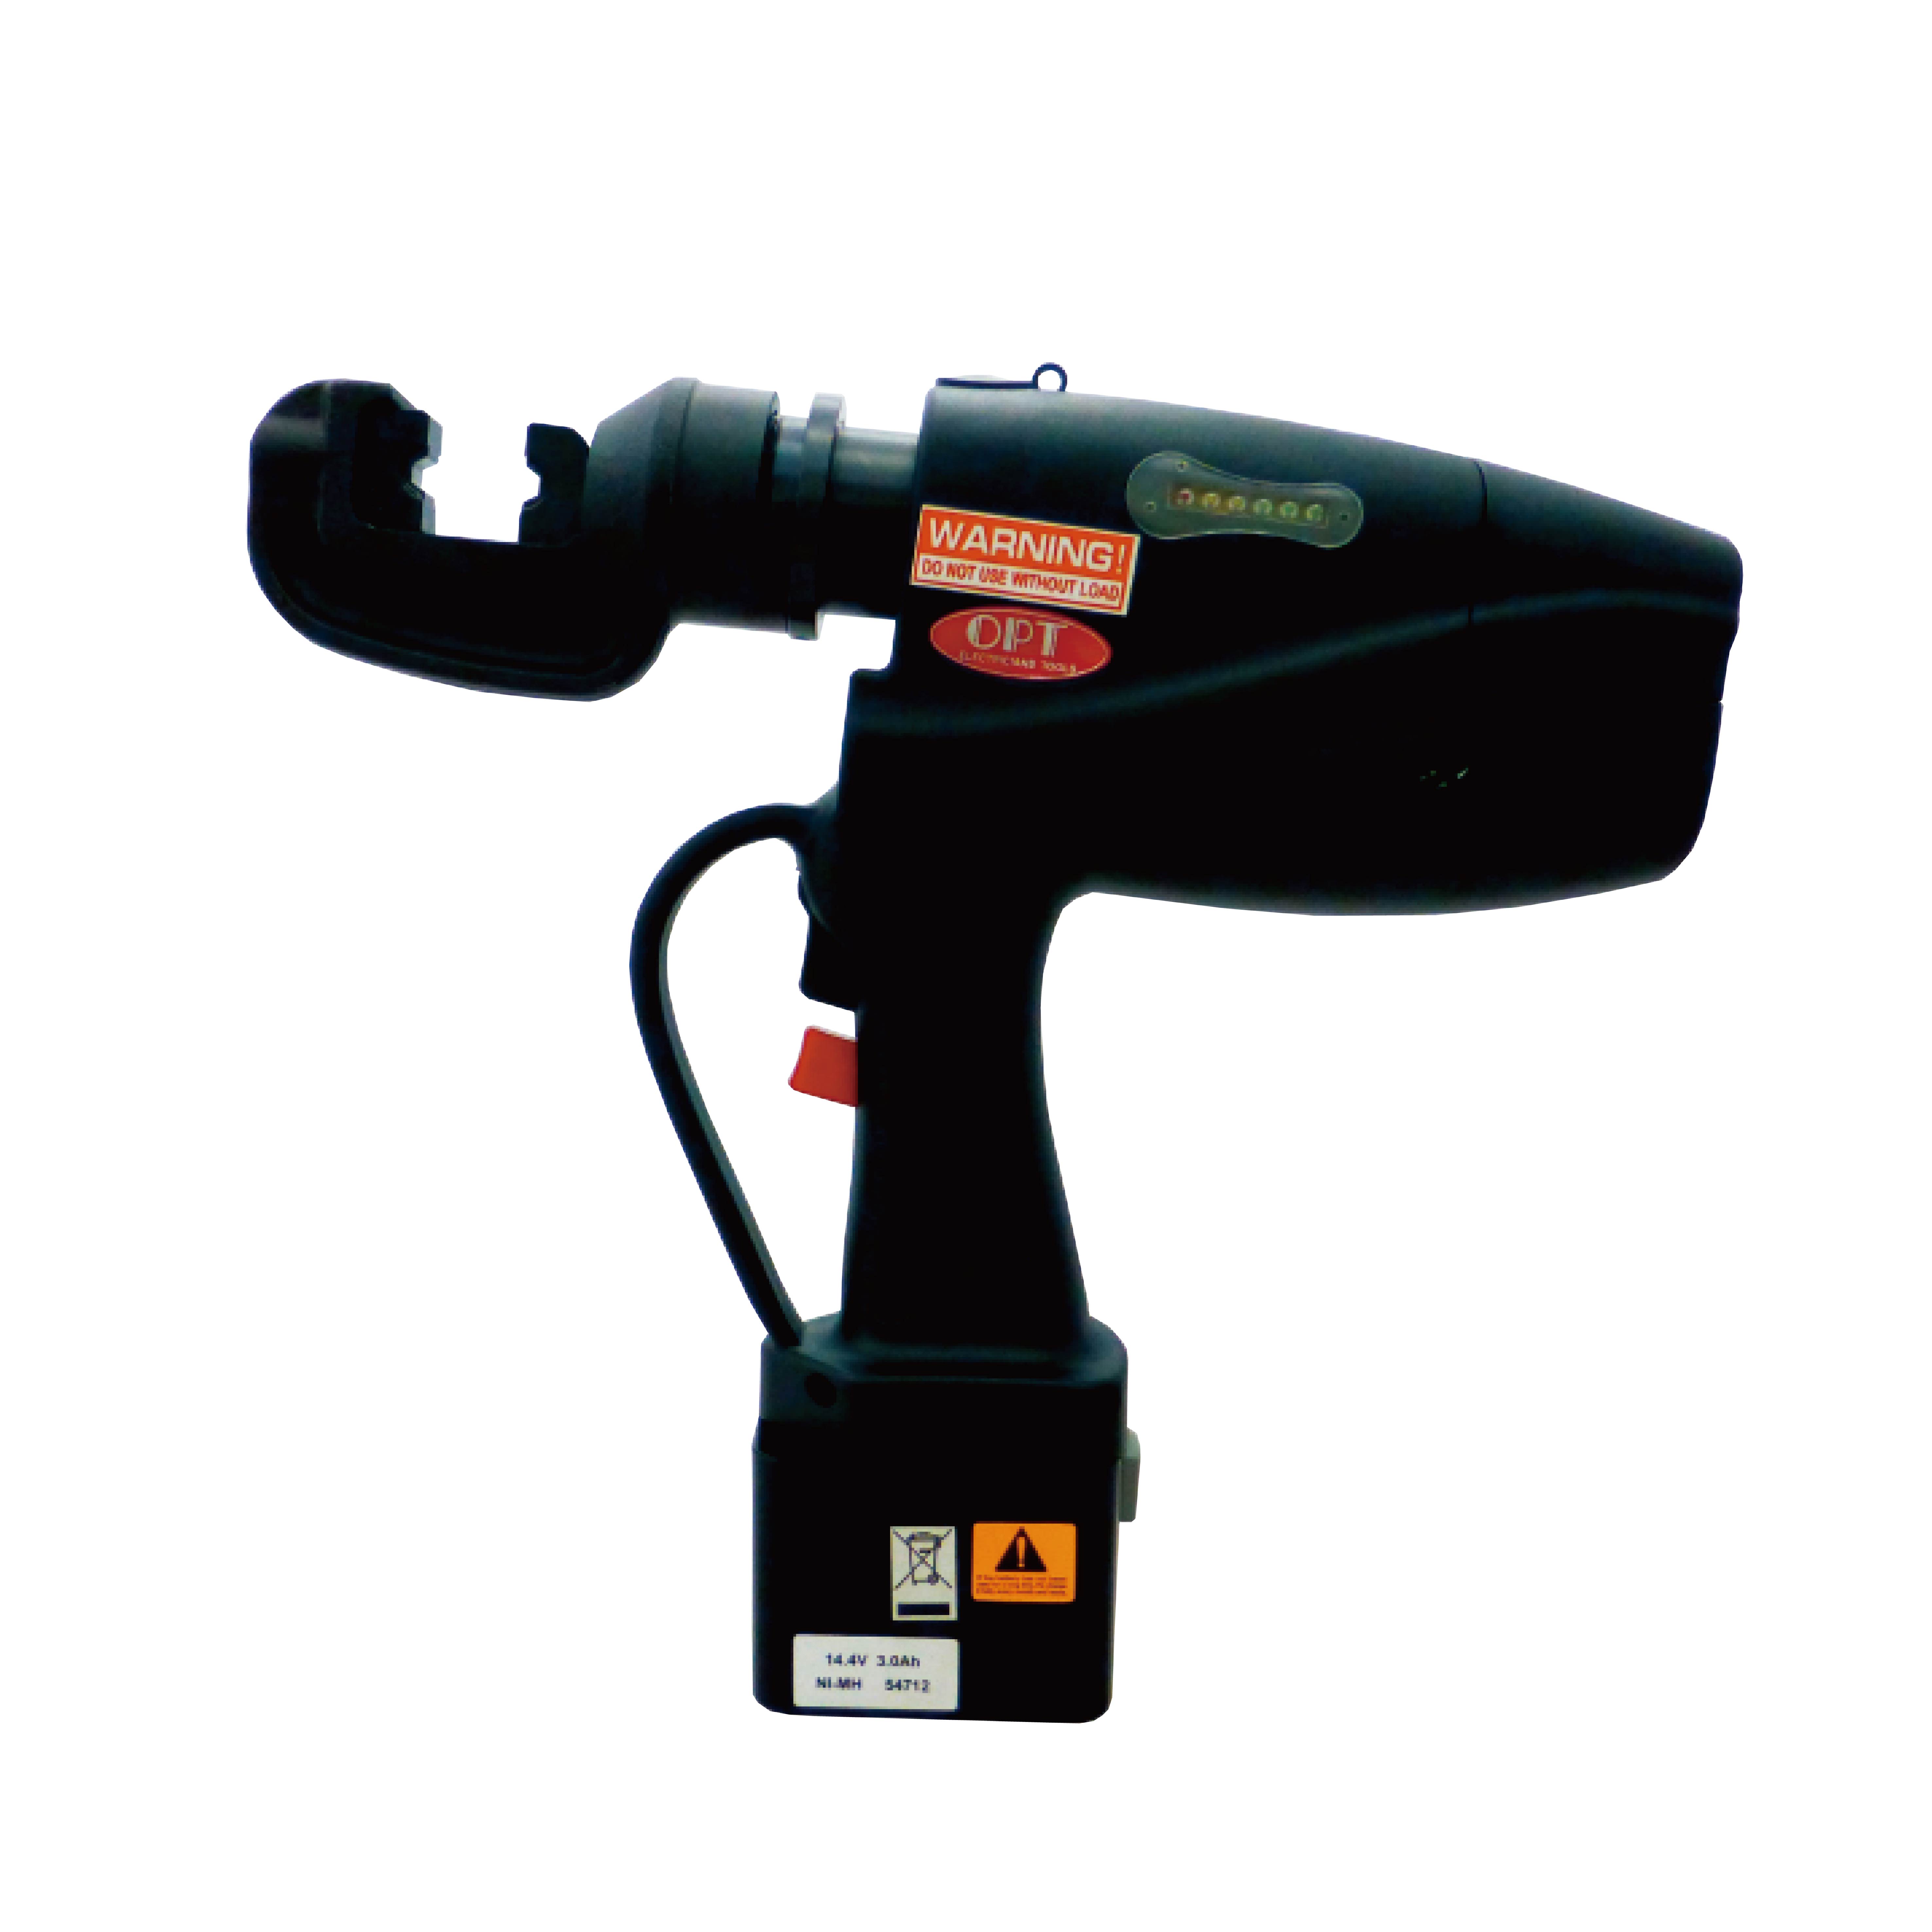 EPL-150D CORDLESS HYDRAULIC CRIMPING TOOLS